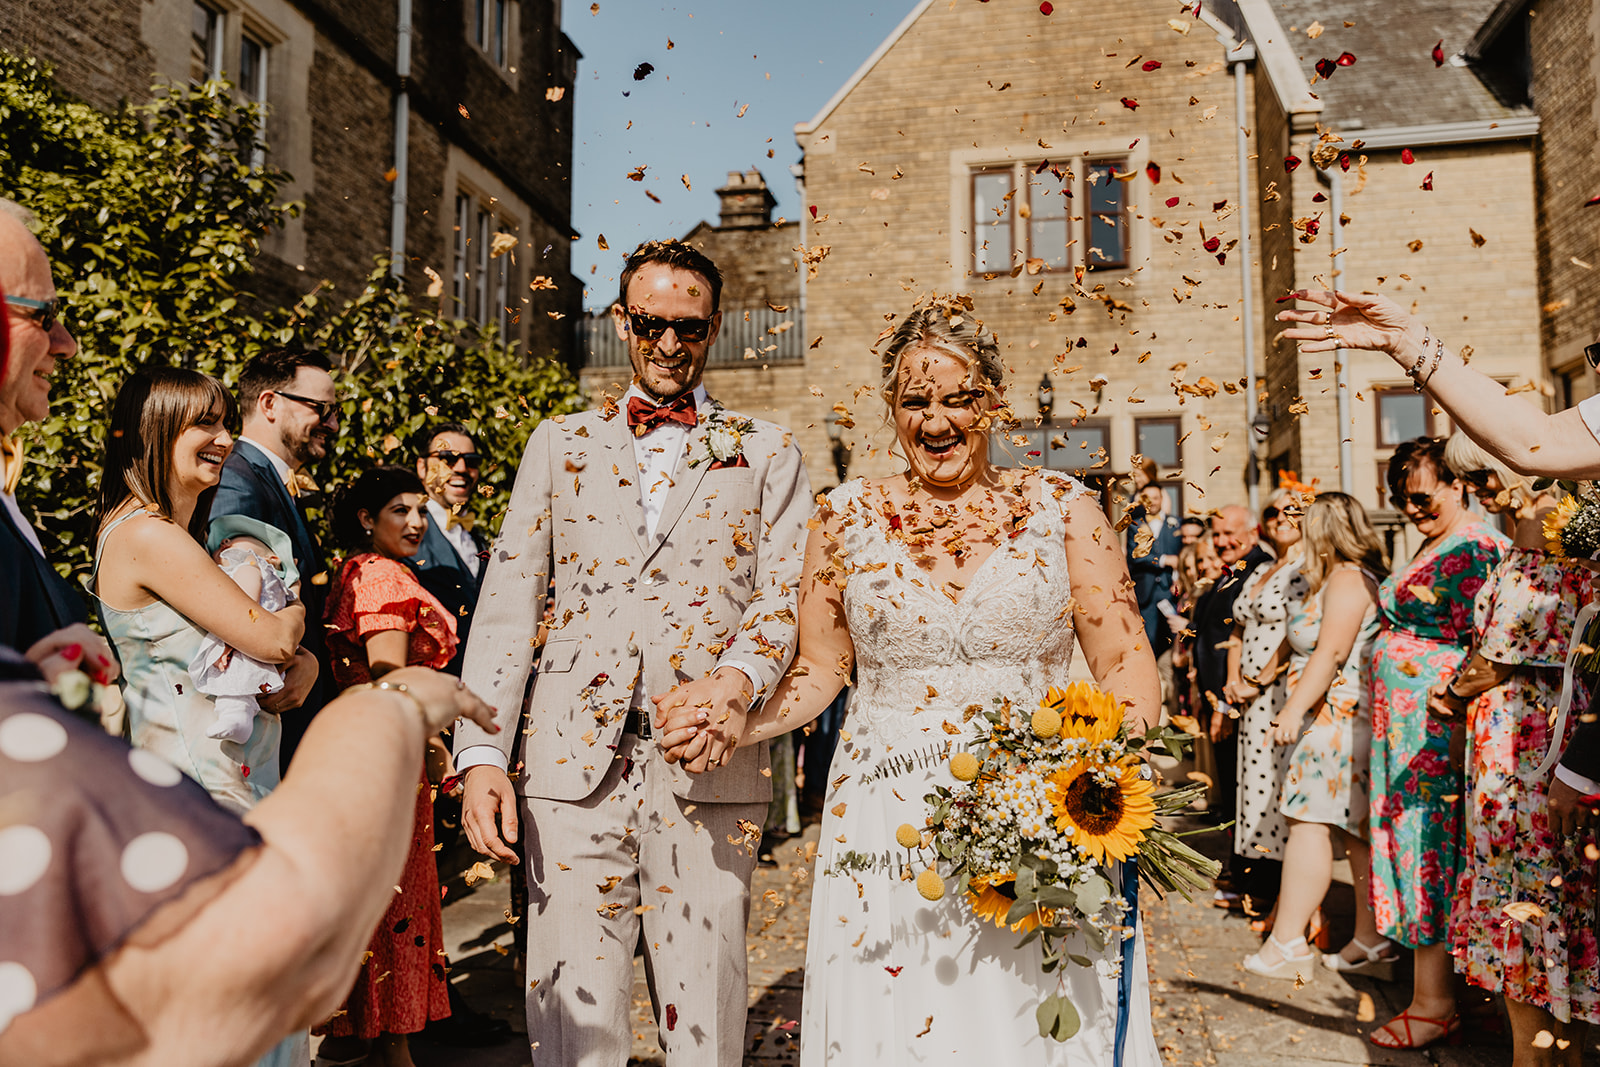 Bride and Groom under confetti at a South Lodge, Sussex Wedding. By Olive Joy Photography